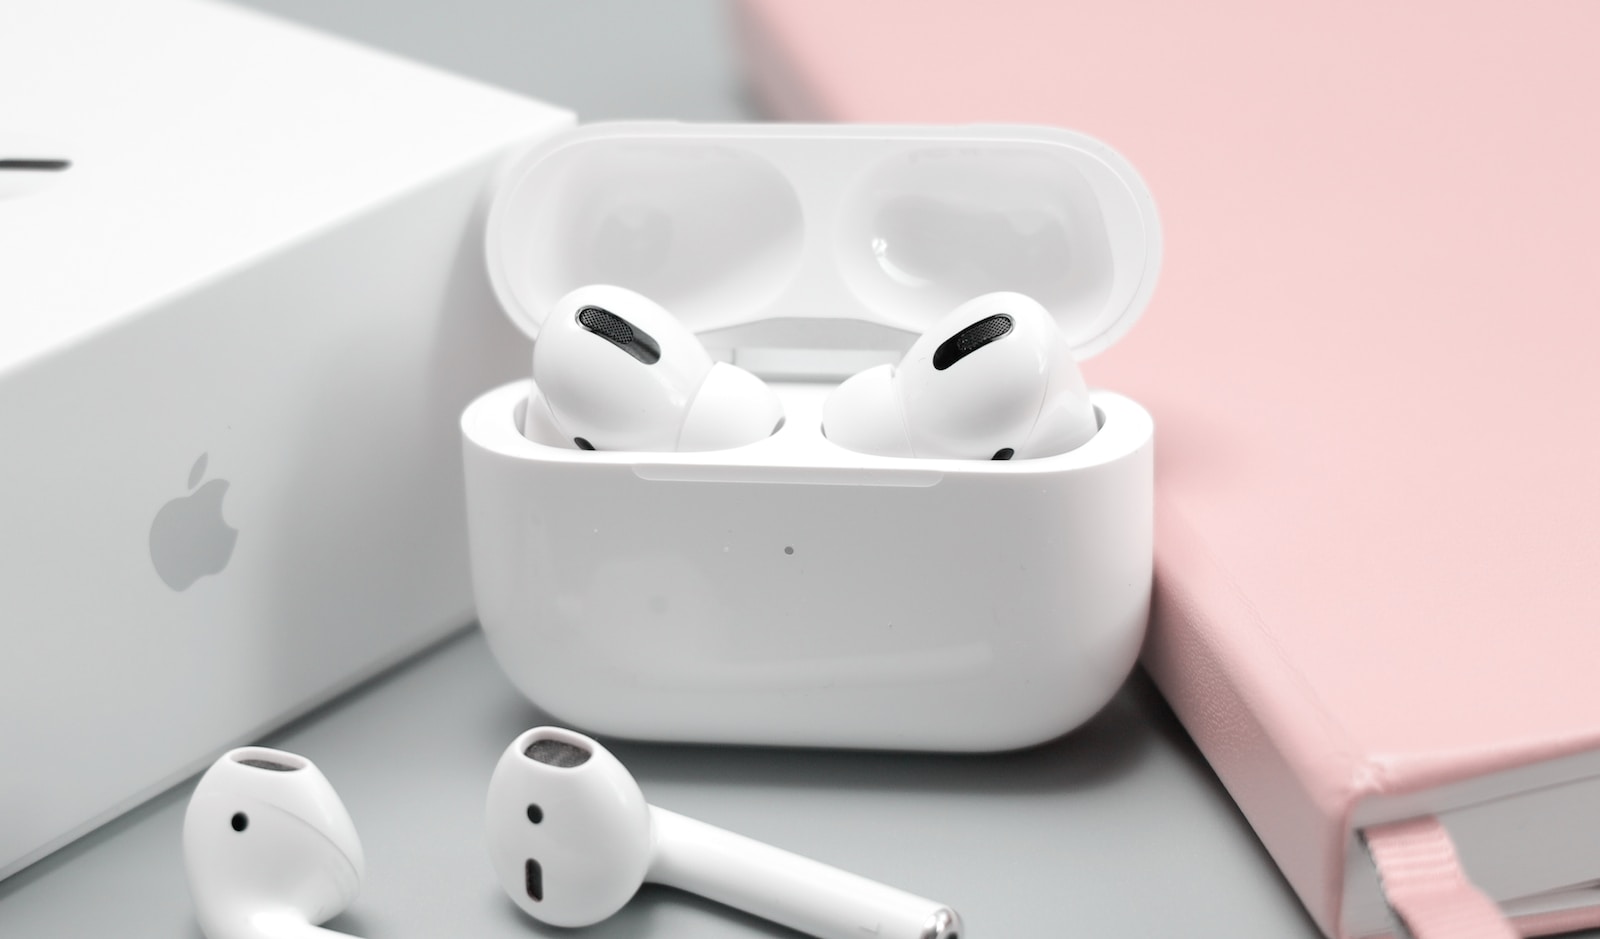 
Why Are Airpods Not Updating Firmware? Here's What You Need To Know